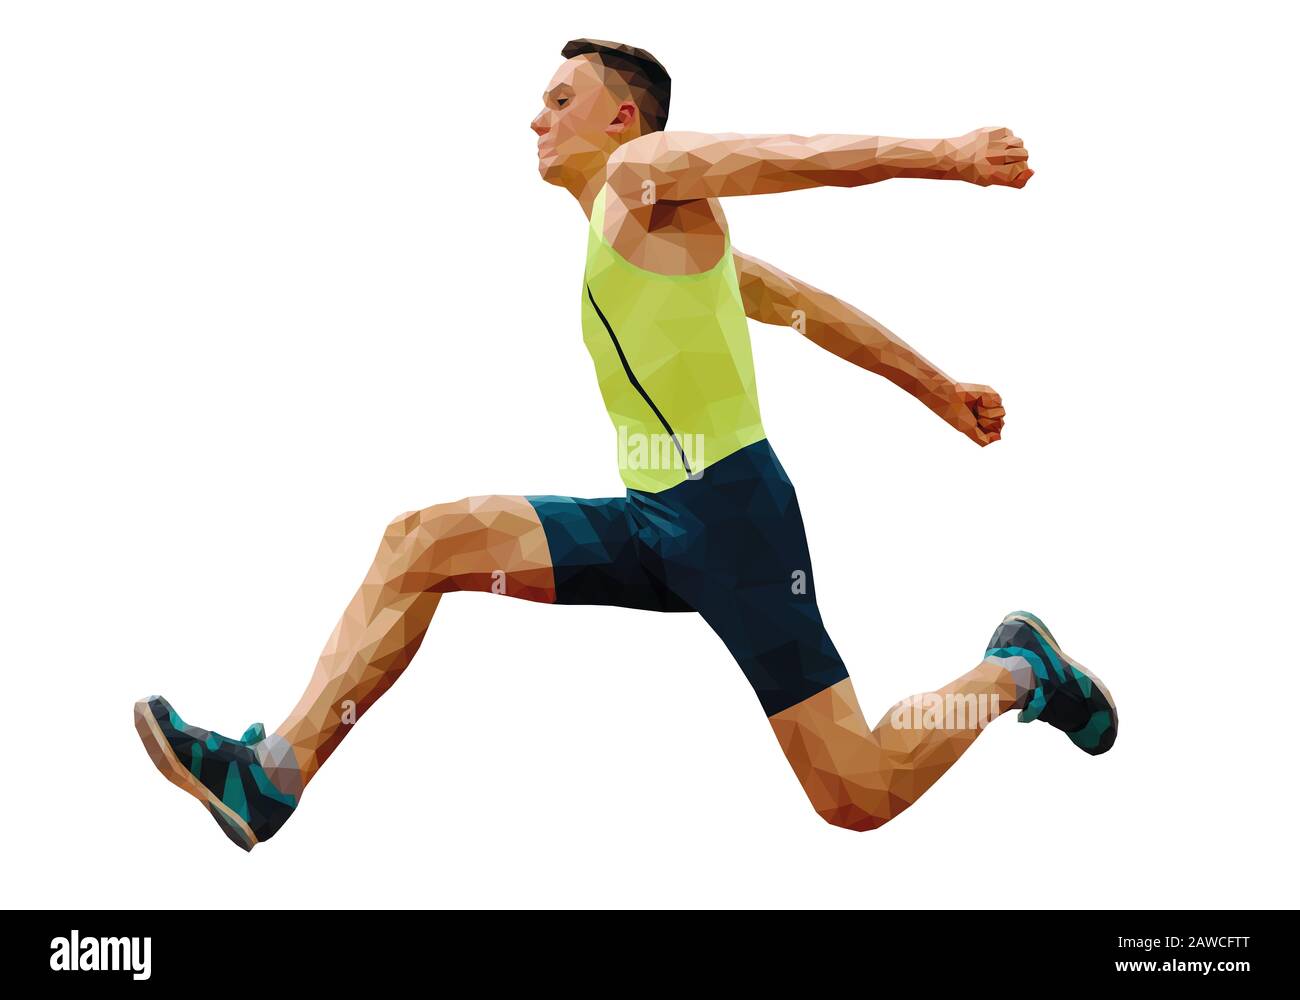 athlete jumping in triple jump polygon vector Stock Photo